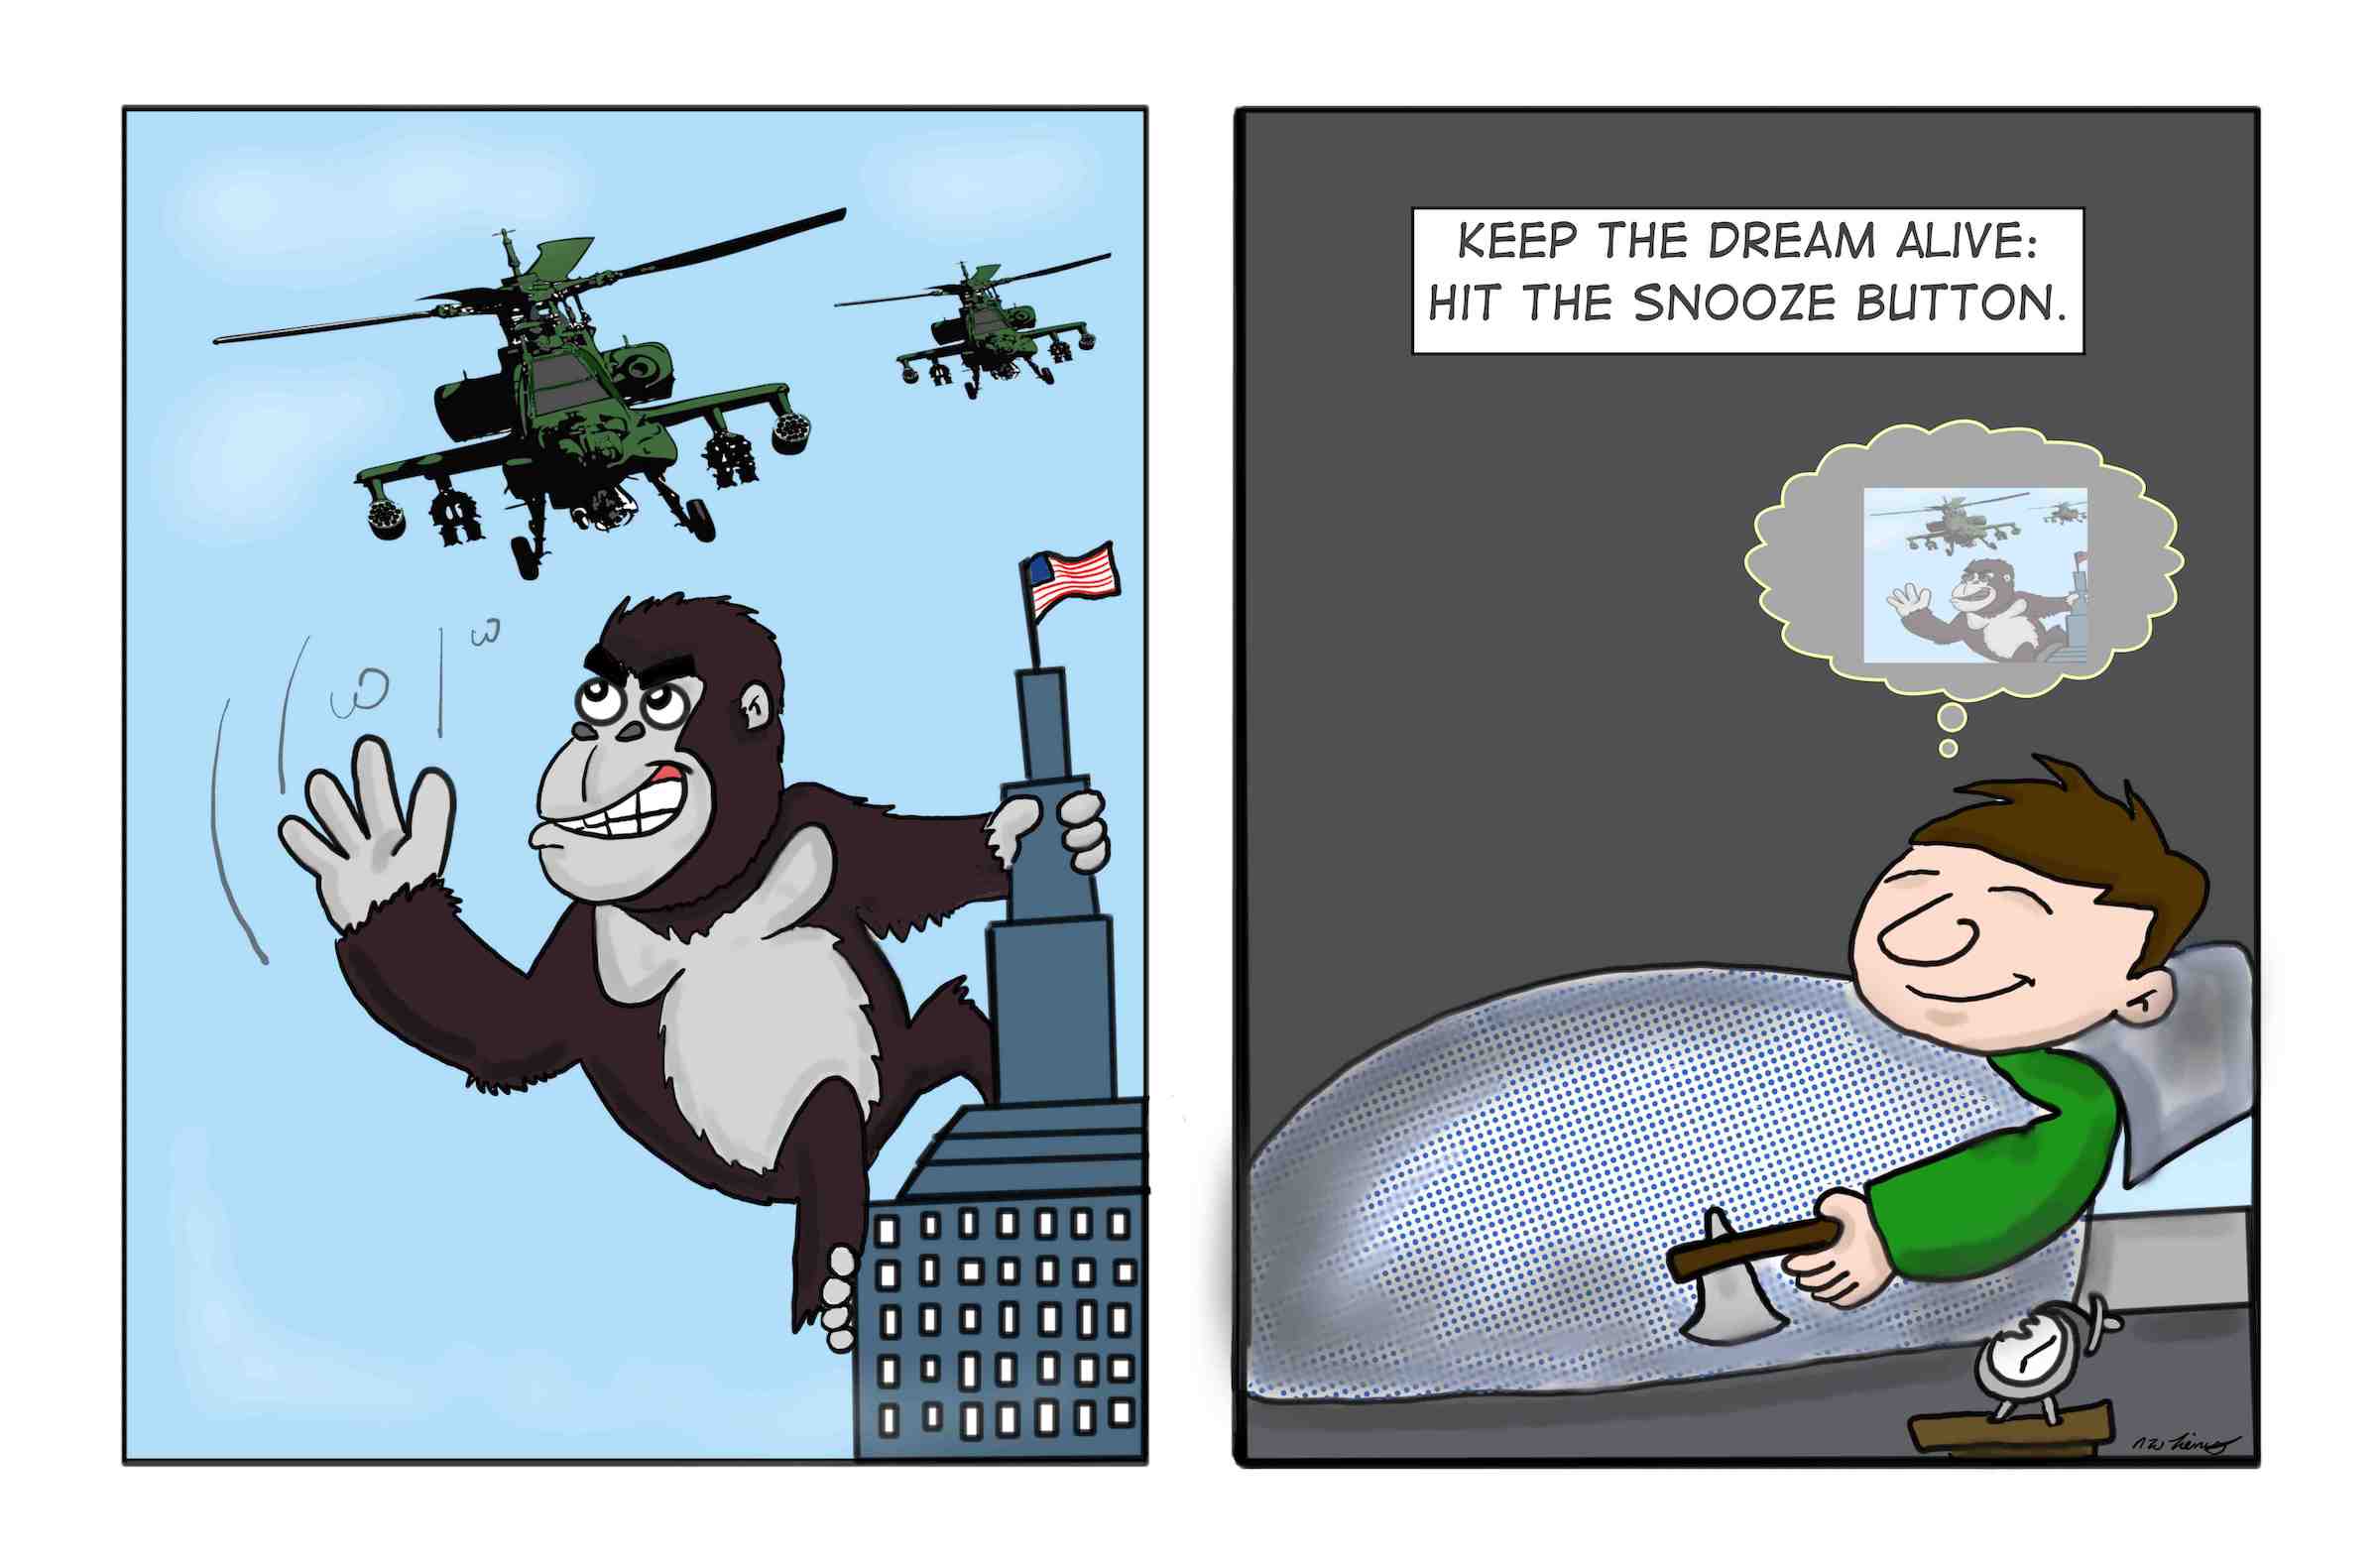 Army attacks King Kong or is it just a dream?